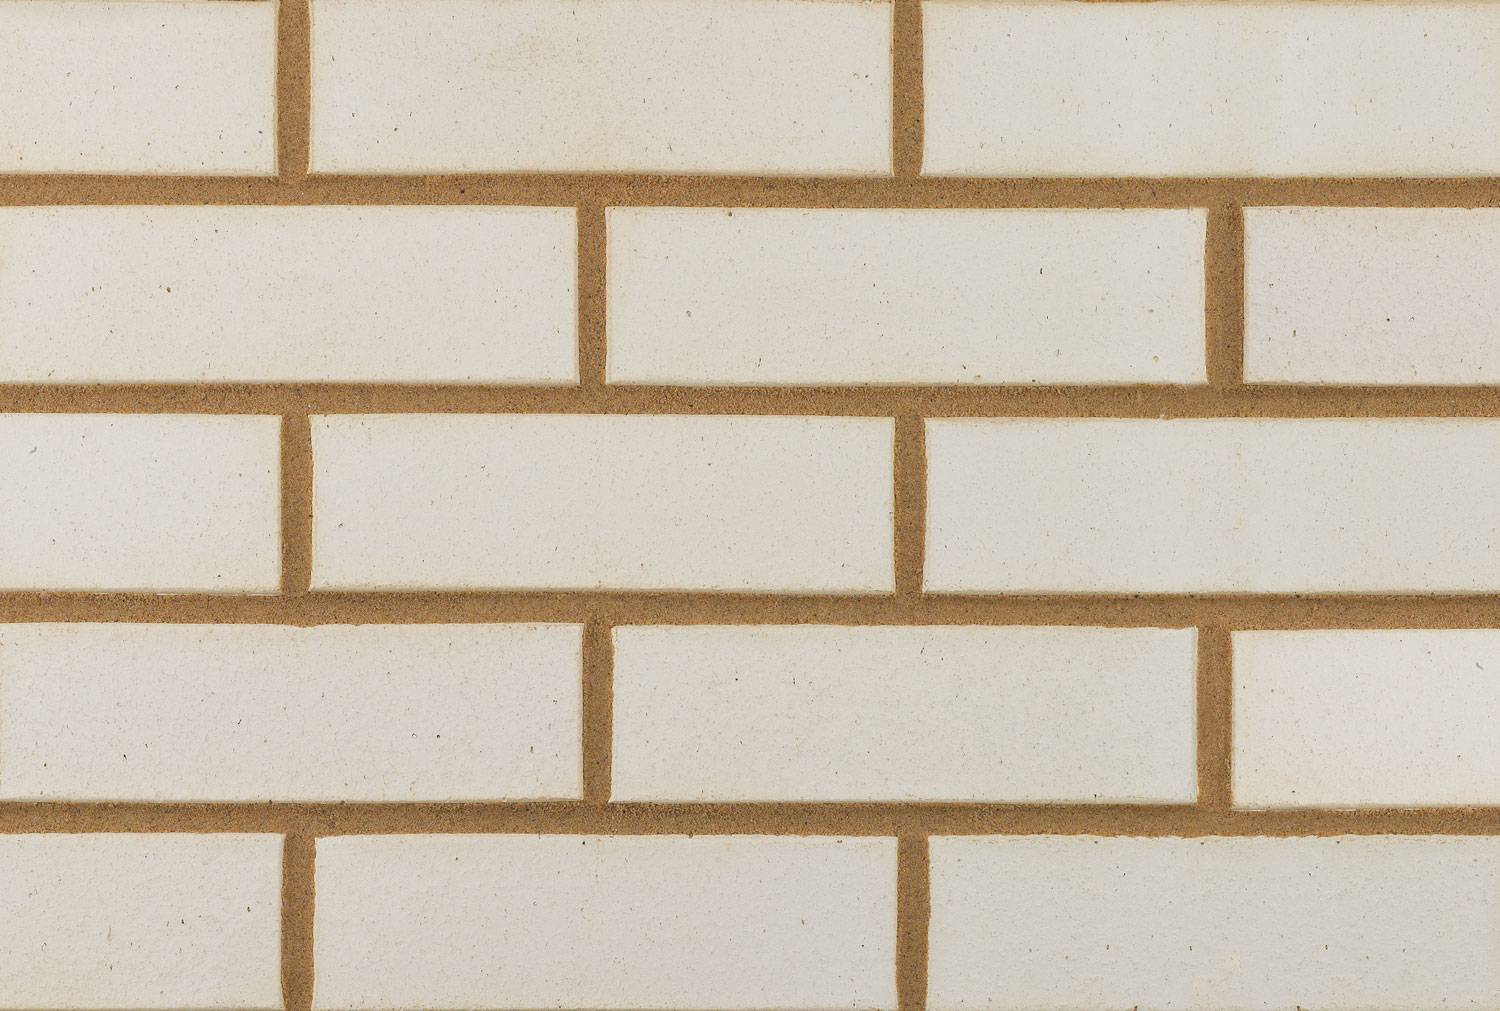 Blockleys Porcelain White Smooth Clay Brick